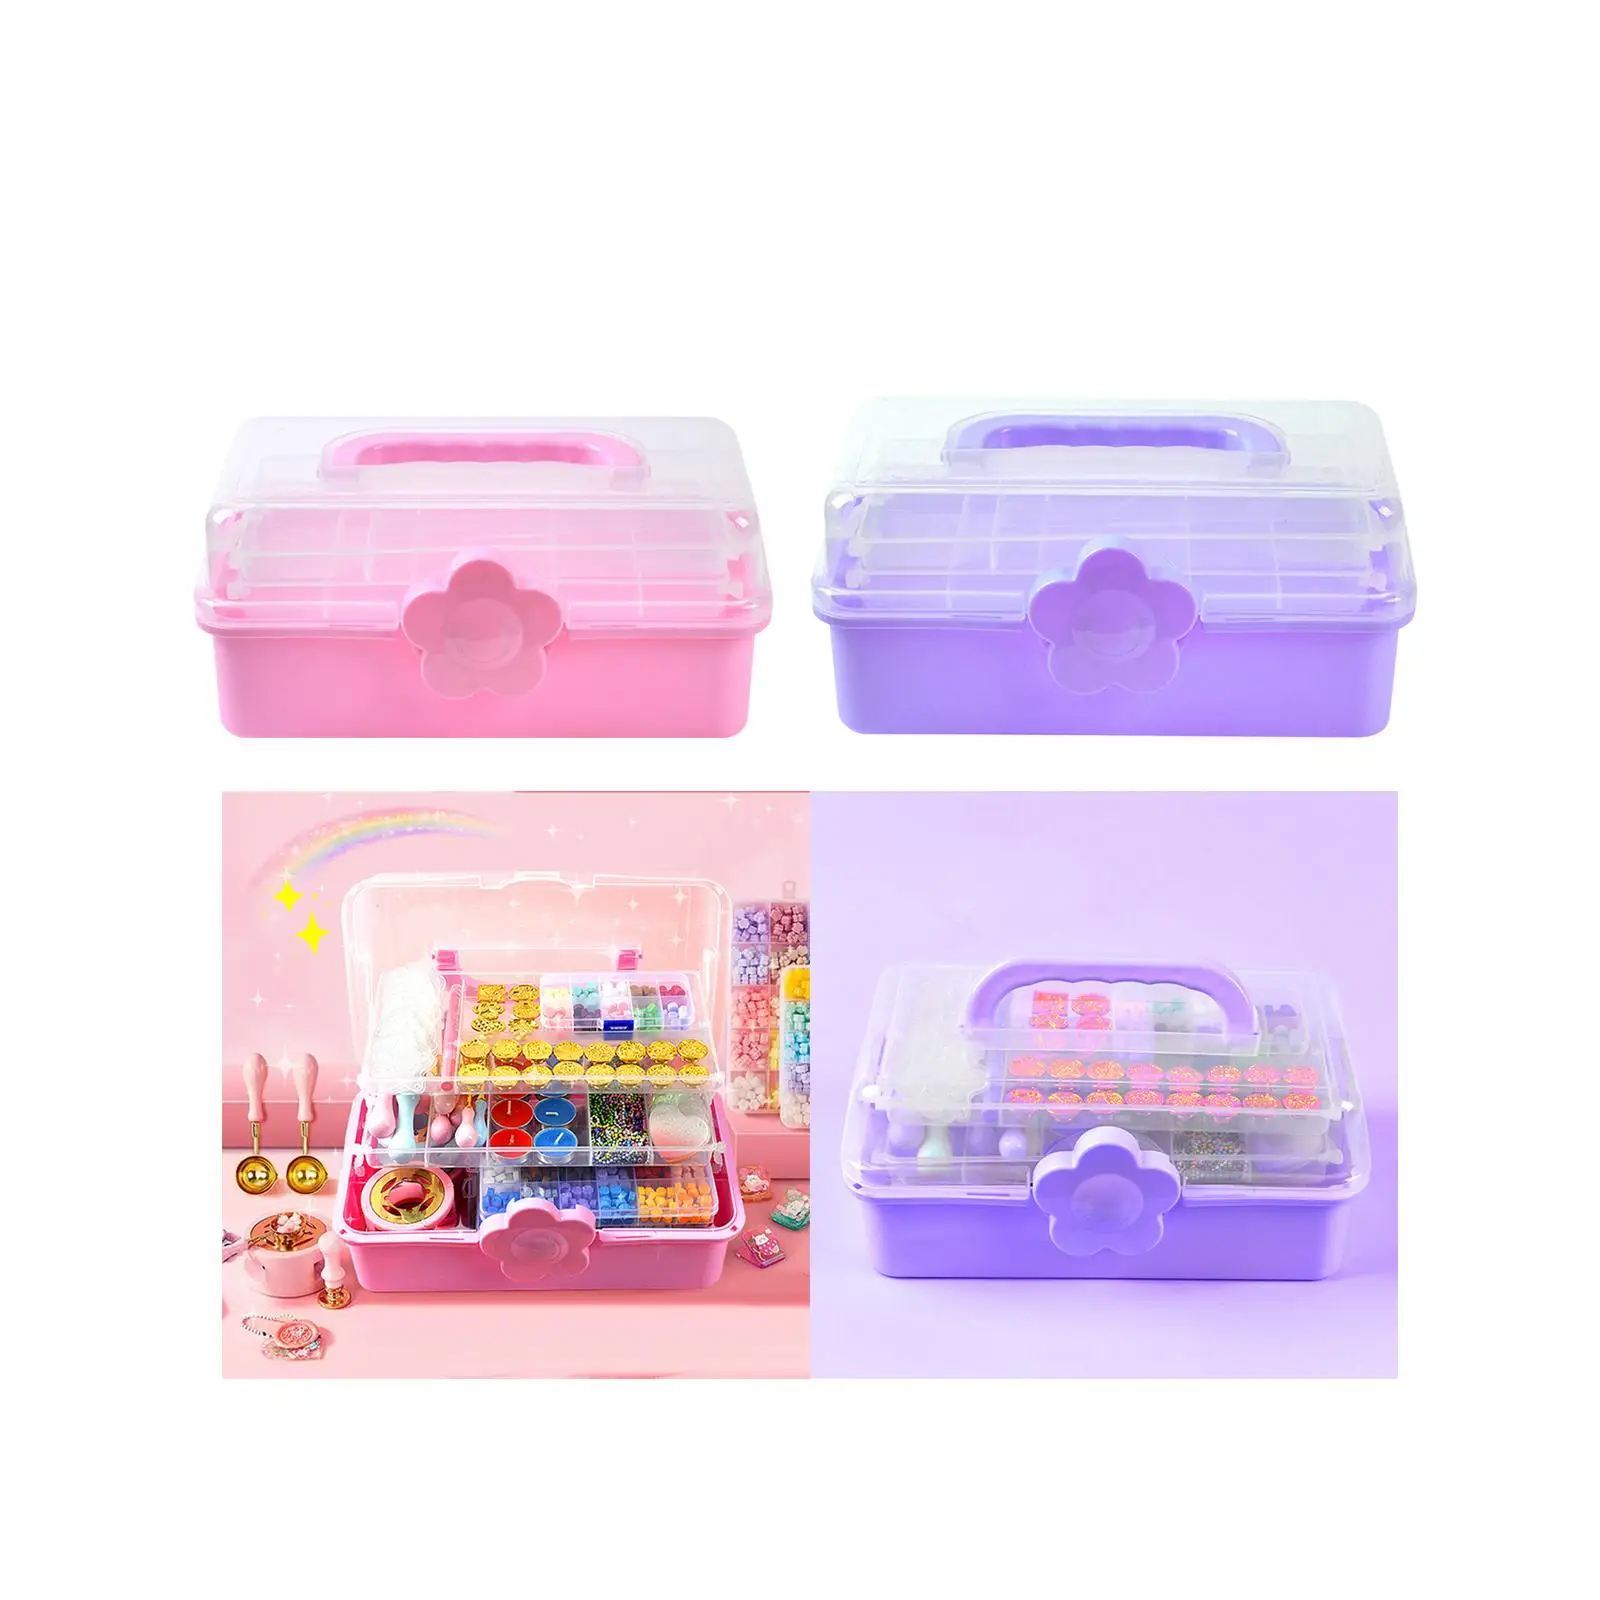 Sewing Supplies Organizer Portable Storage Box Folding Tool Case 3 Tier for Bead Sewing Scrapbooking Items Pencils Art Craft